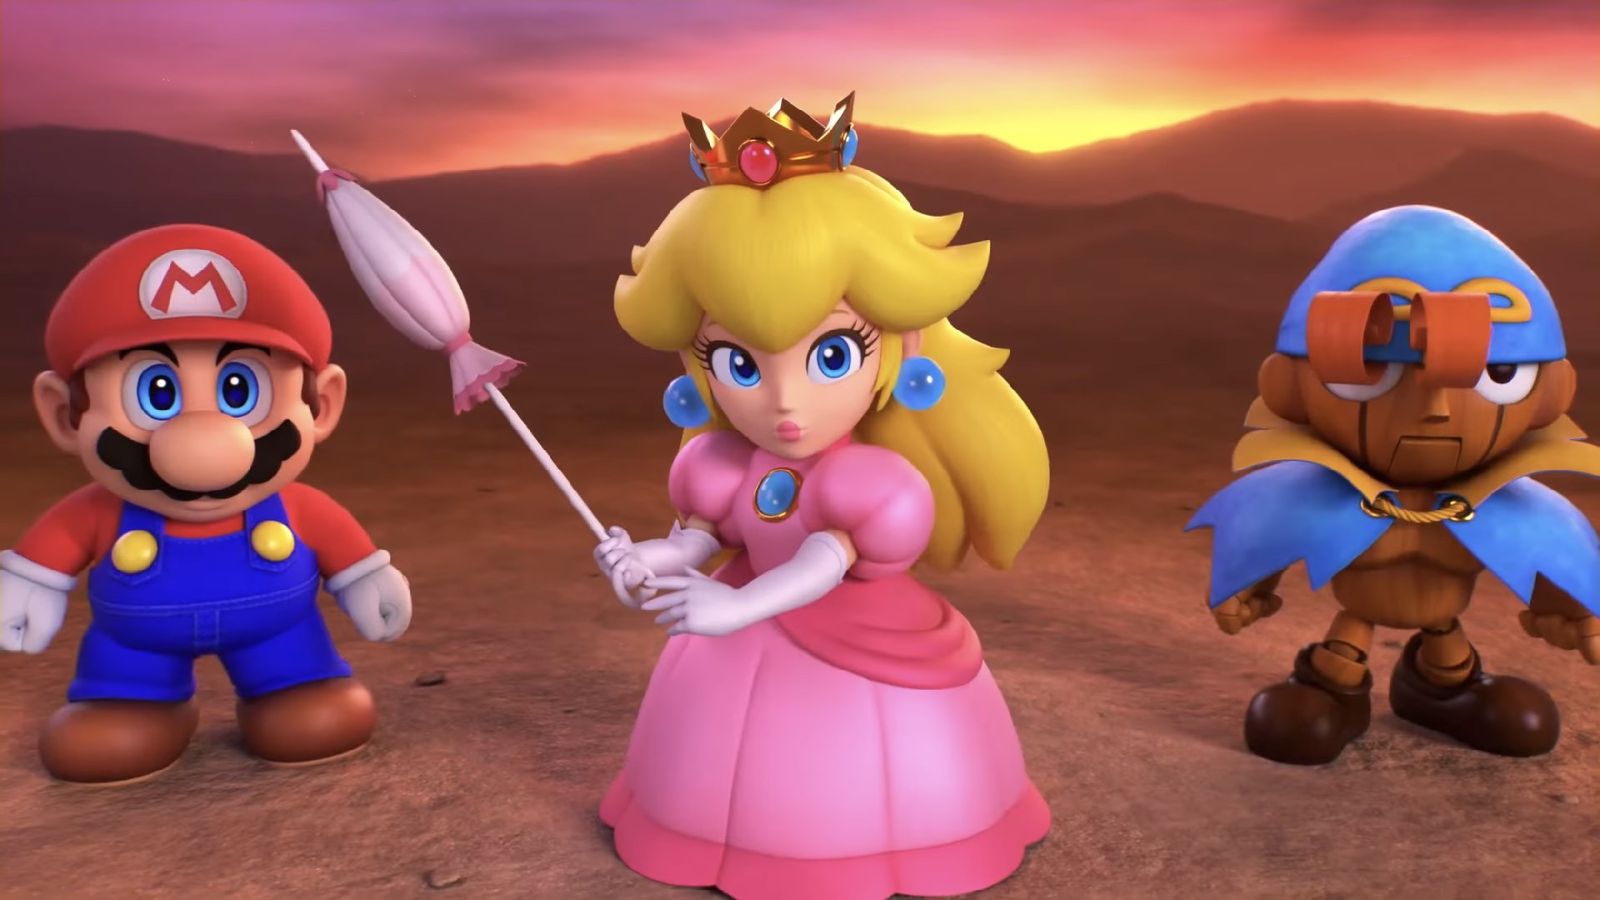 Super Mario RPG Remake - Mario, Princess Peach and Geno standing together ready for battle